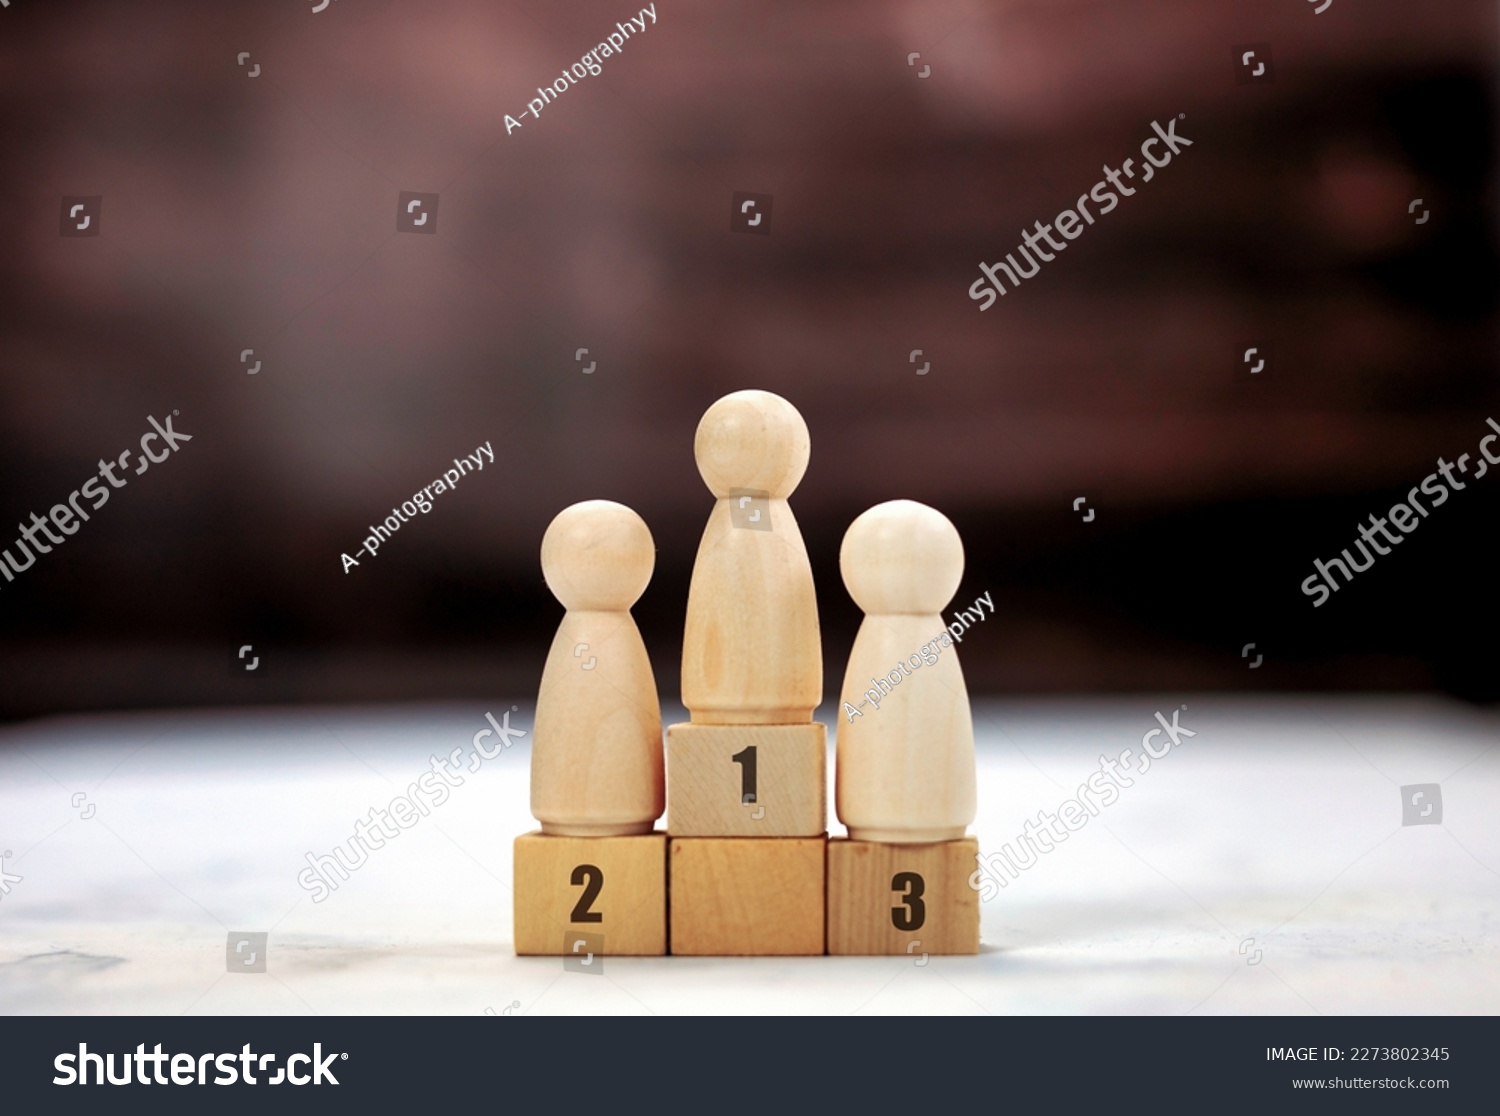 Achievement concept. Wooden podium 1, 2, 3, human standing on podium with ranking winner business and sport competition concept copy space space for text #2273802345